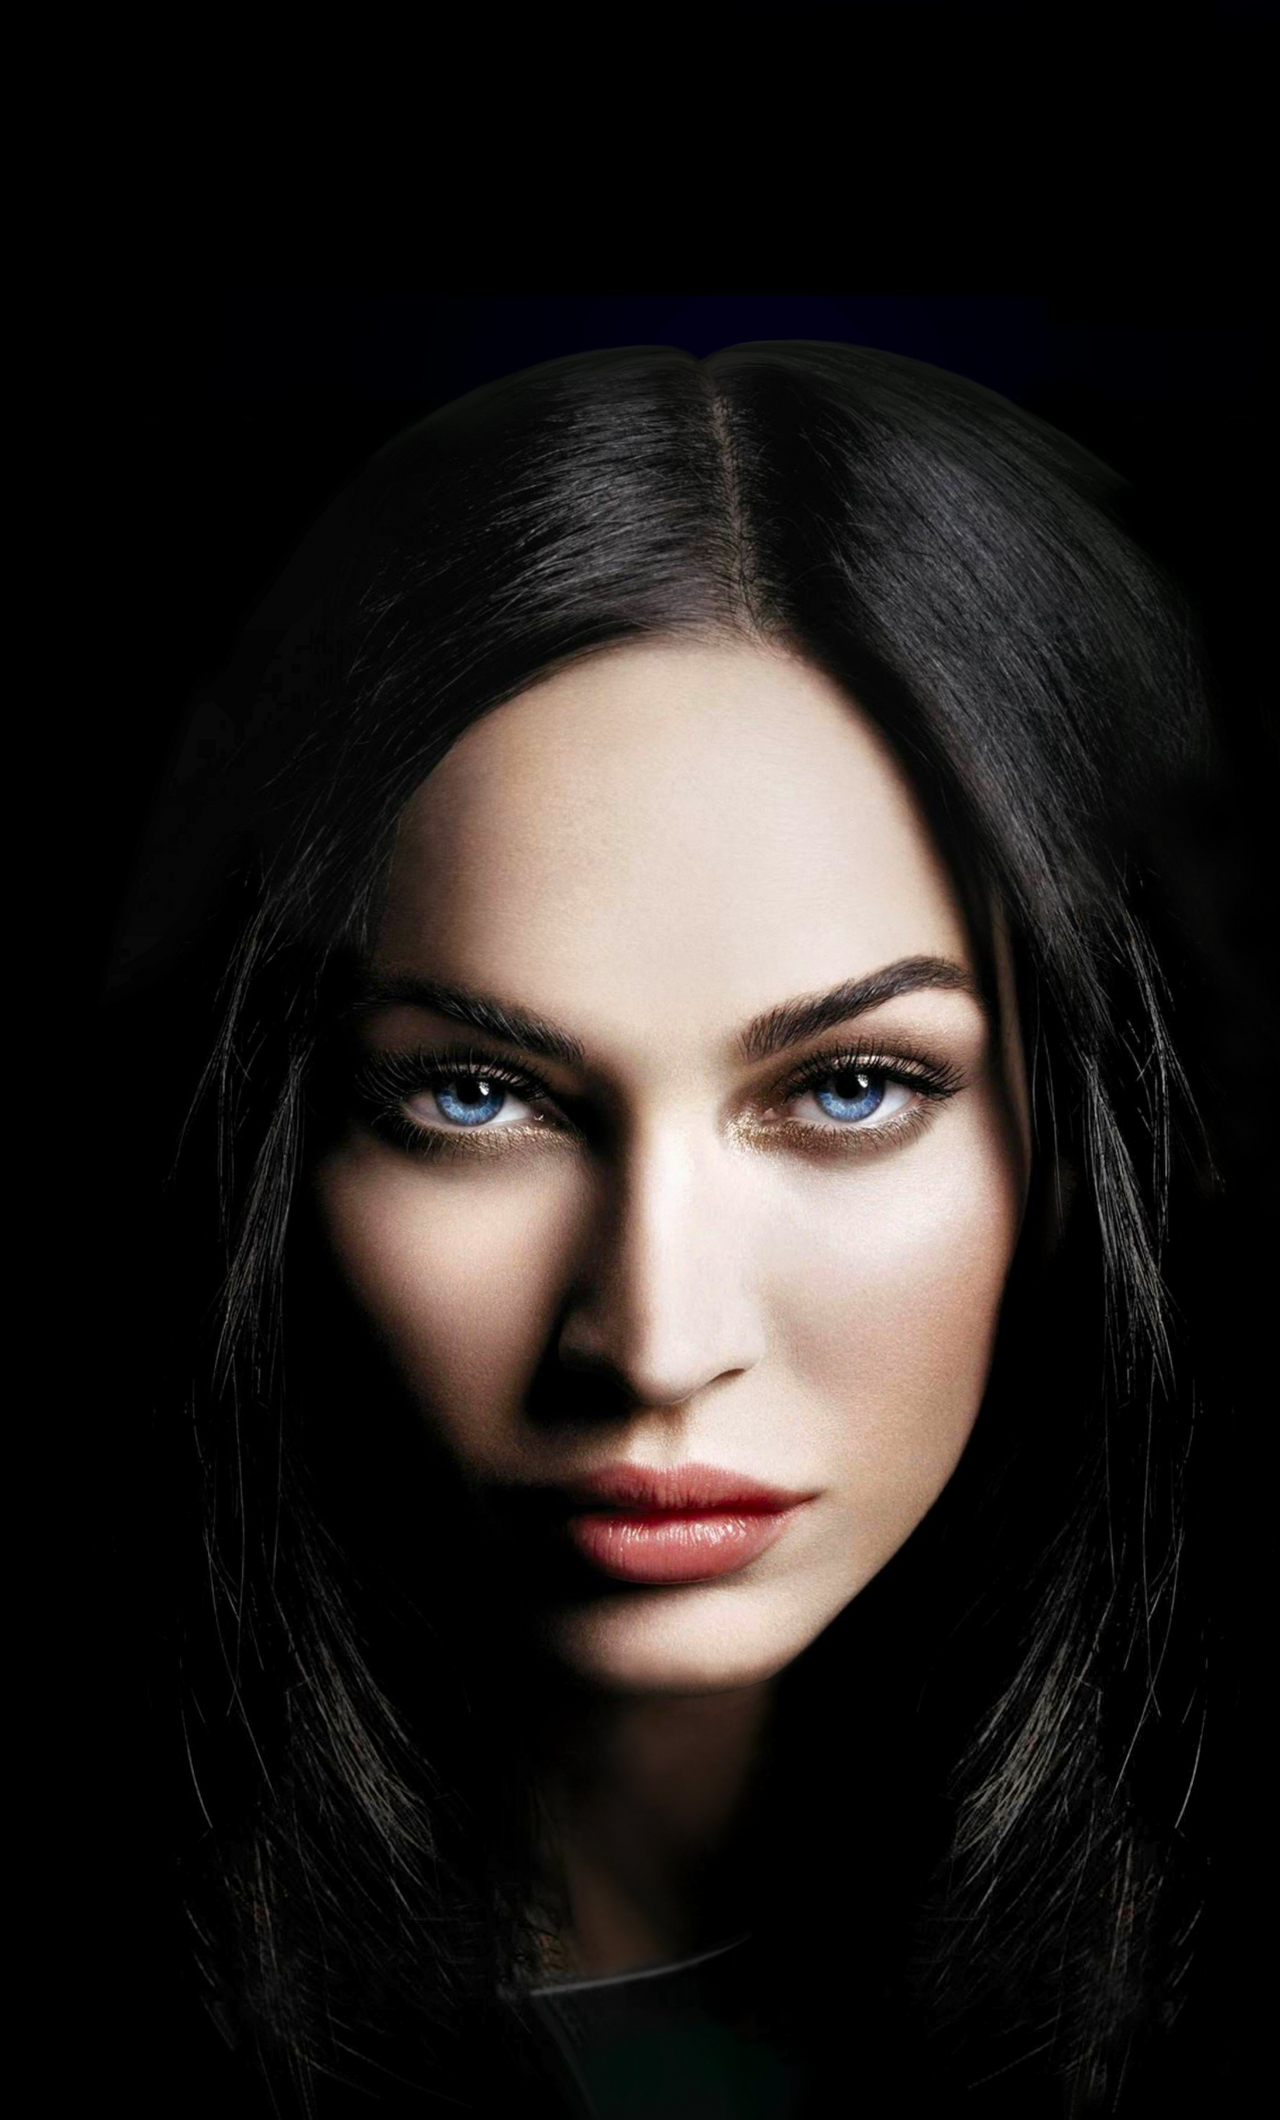 Be The Unique Megan Fox American Actress Poster 12 x 12 Inches  Amazonde  Stationery  Office Supplies